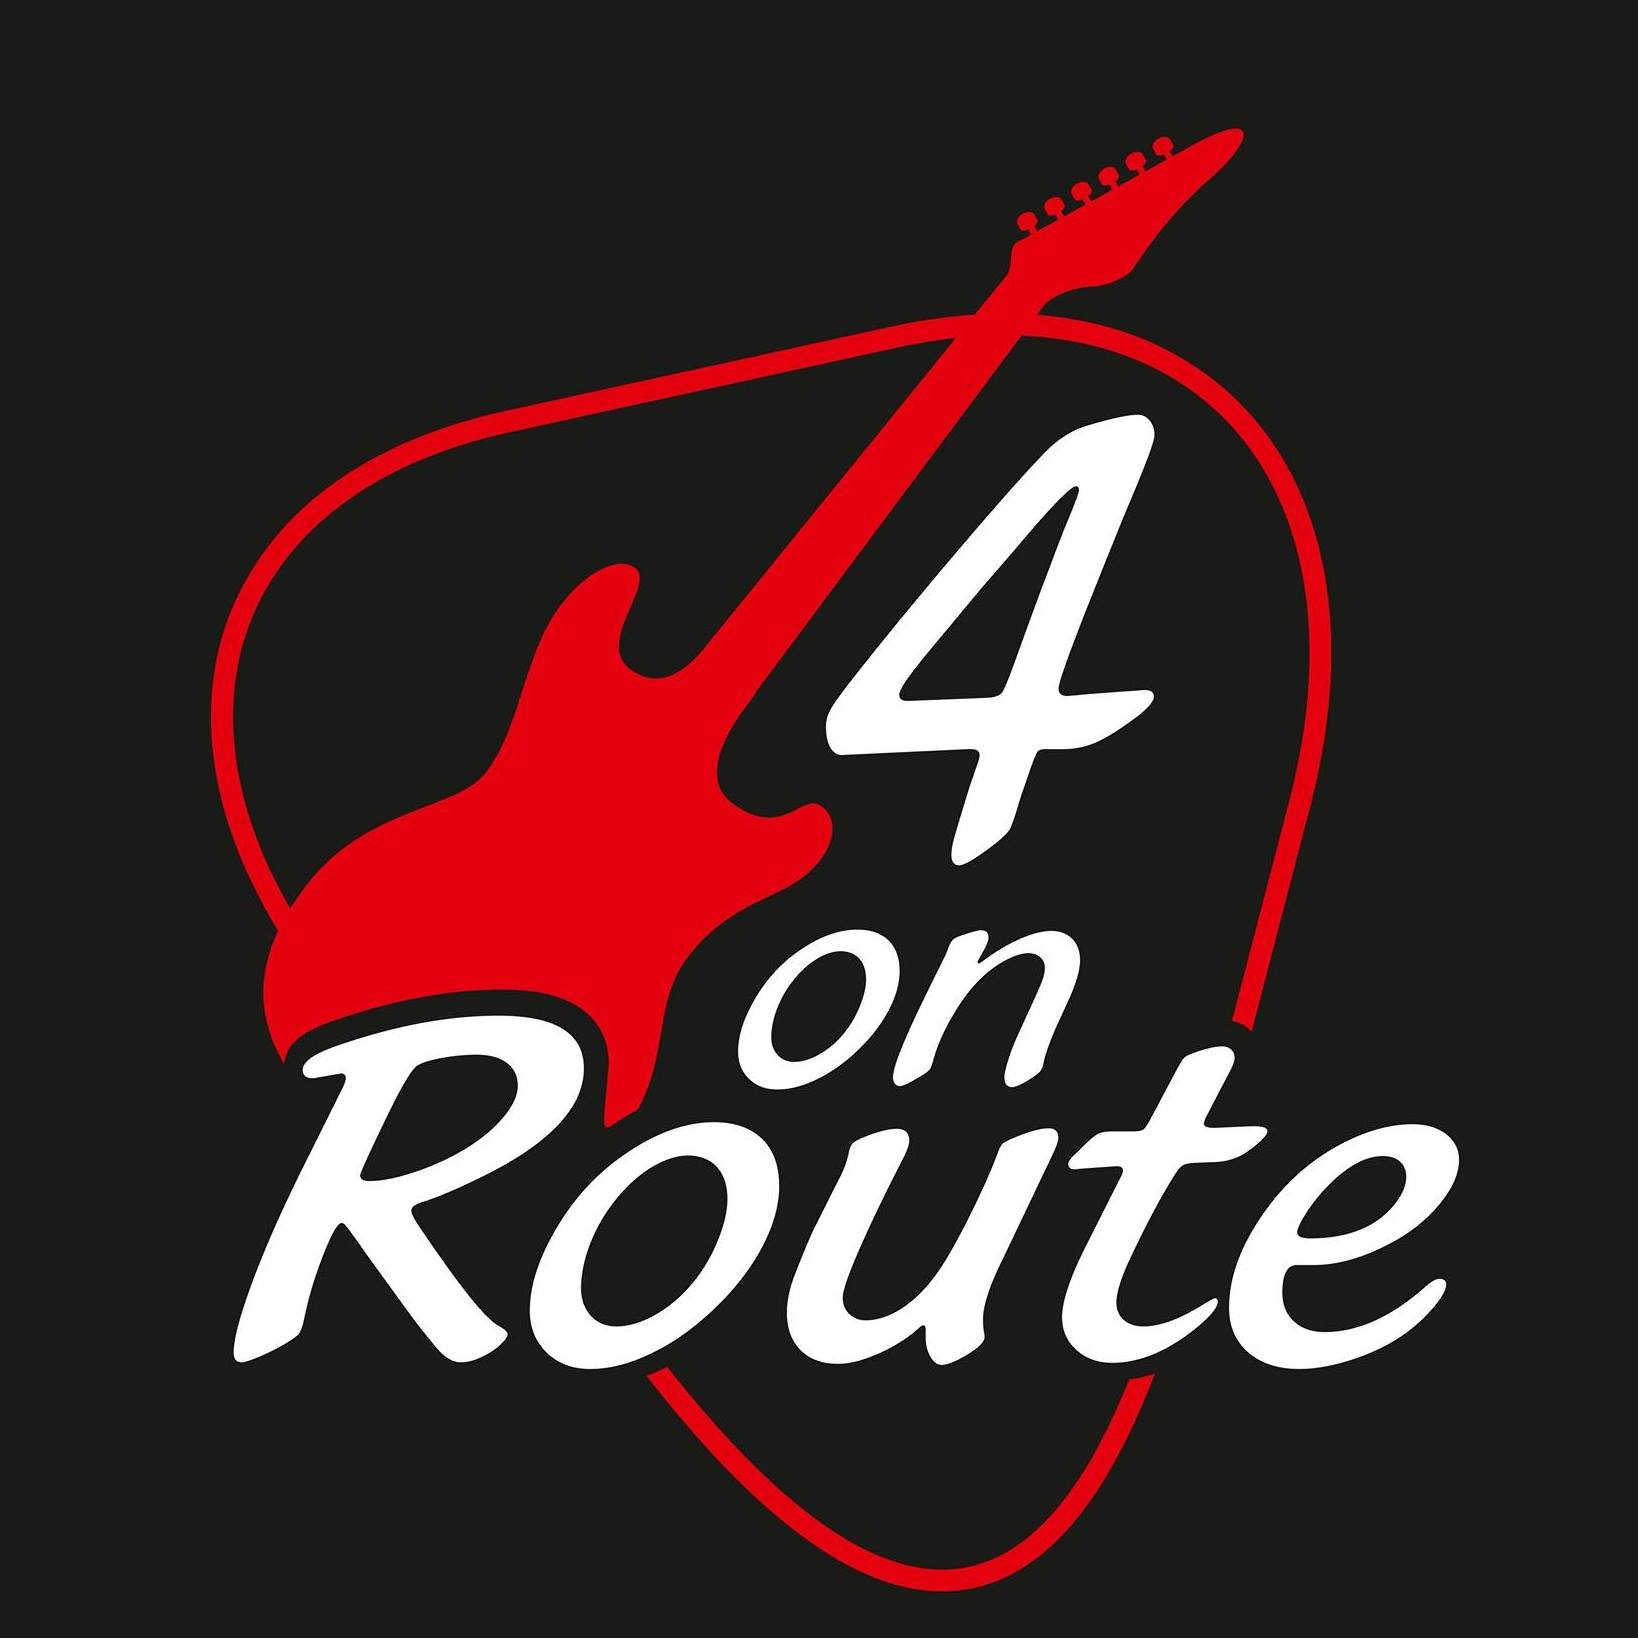 4onroute